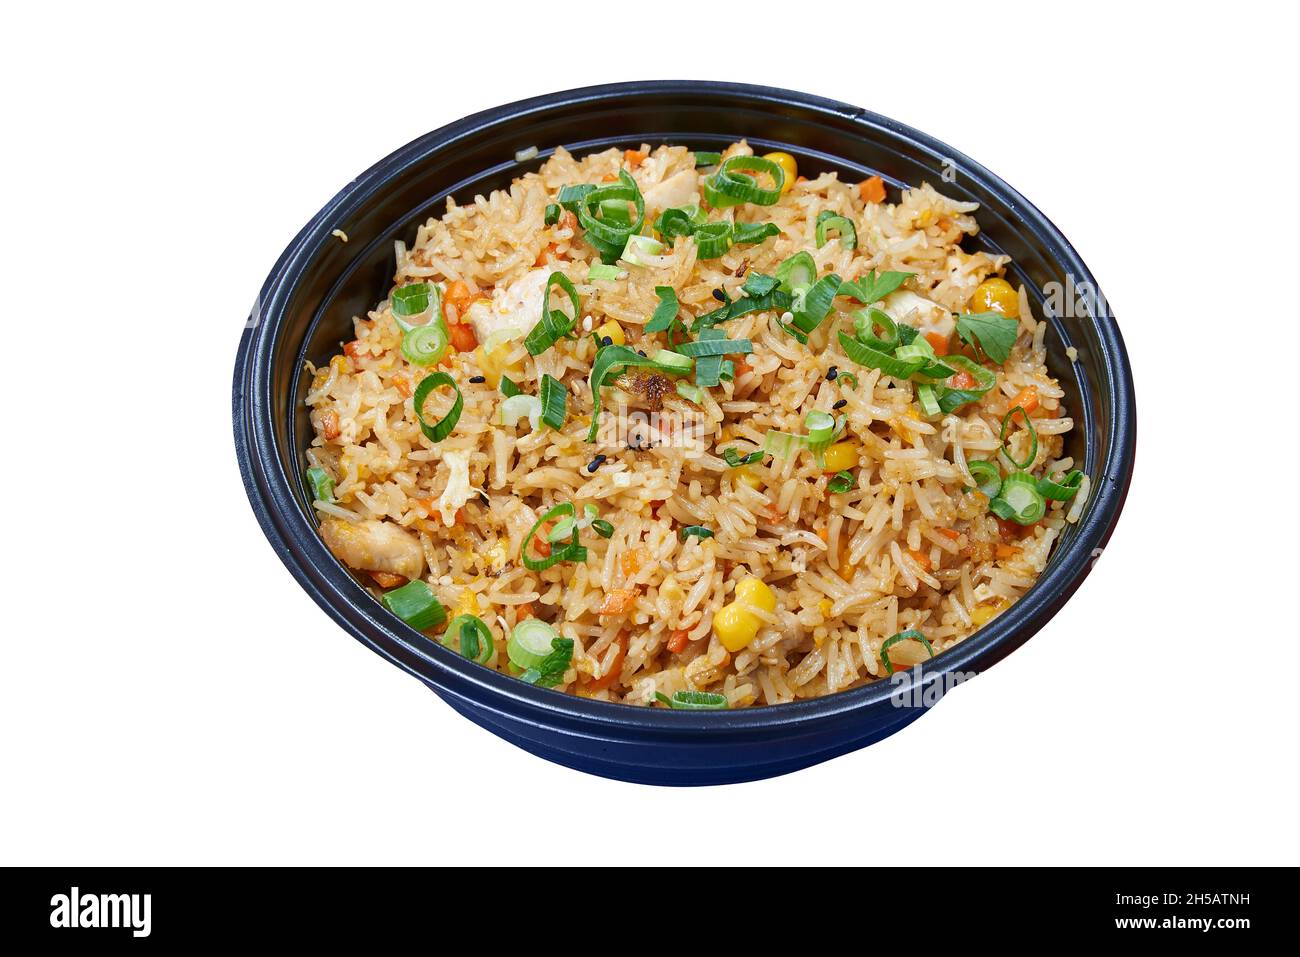 Delivery round box with chicken and Rice. Isolated with clipping path Stock Photo